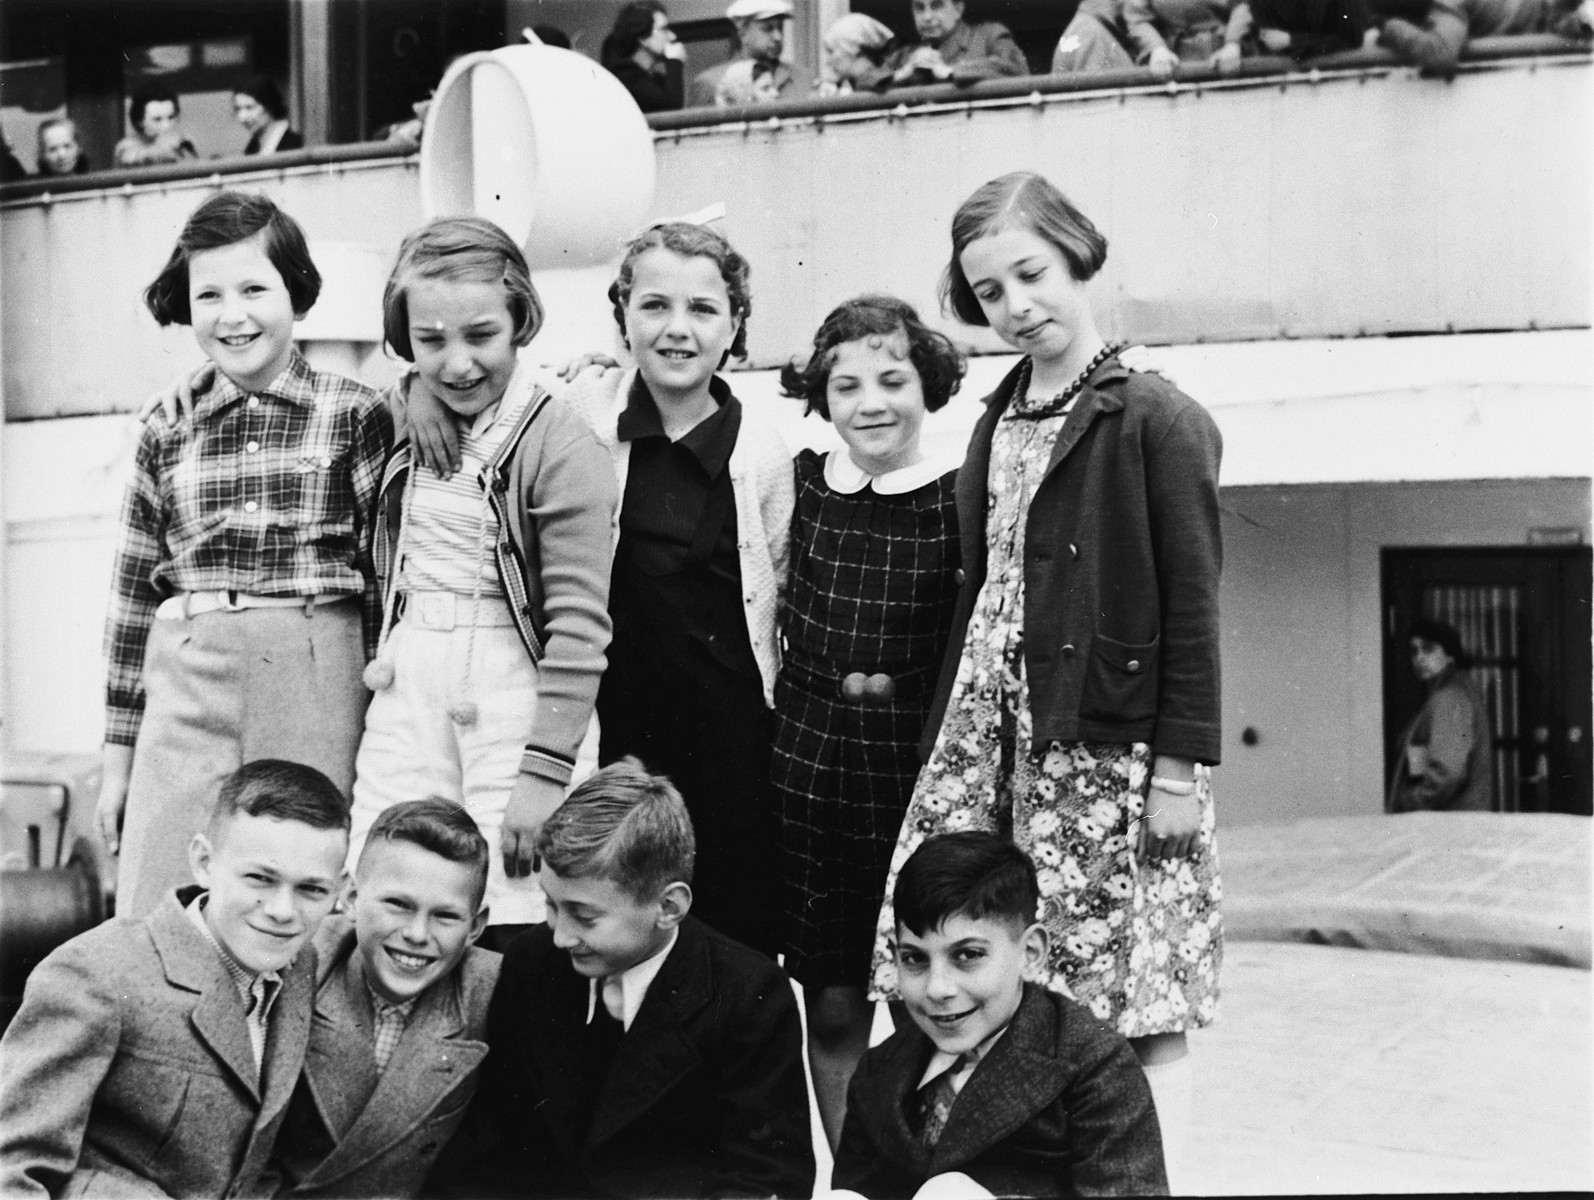 Group portrait of Jewish refugee children on board the St. Louis. 

Among those pictured are Evelyn Klein (back row, center), Herbert Karliner (front row, left), Walter Karliner (front row, second from the left), Eric Stein (front row, second from the right), and Harry Fuld (font row, far right).